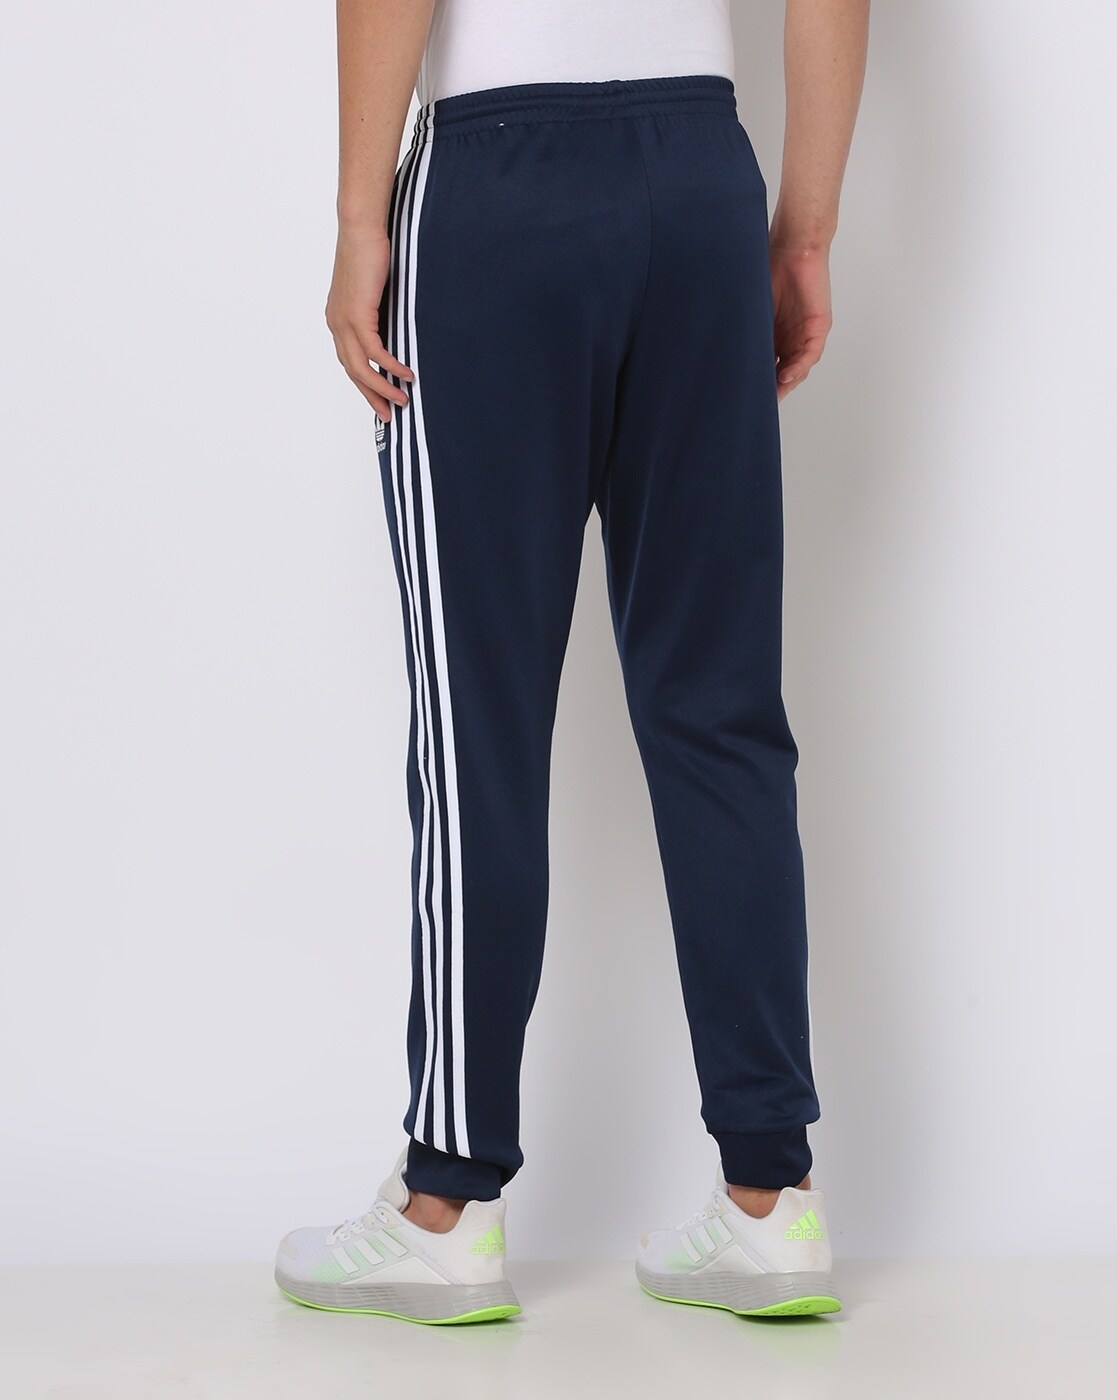 ADIDAS ORIGINALS Striped Women Red, White Track Pants - Buy ADIDAS ORIGINALS  Striped Women Red, White Track Pants Online at Best Prices in India |  Flipkart.com